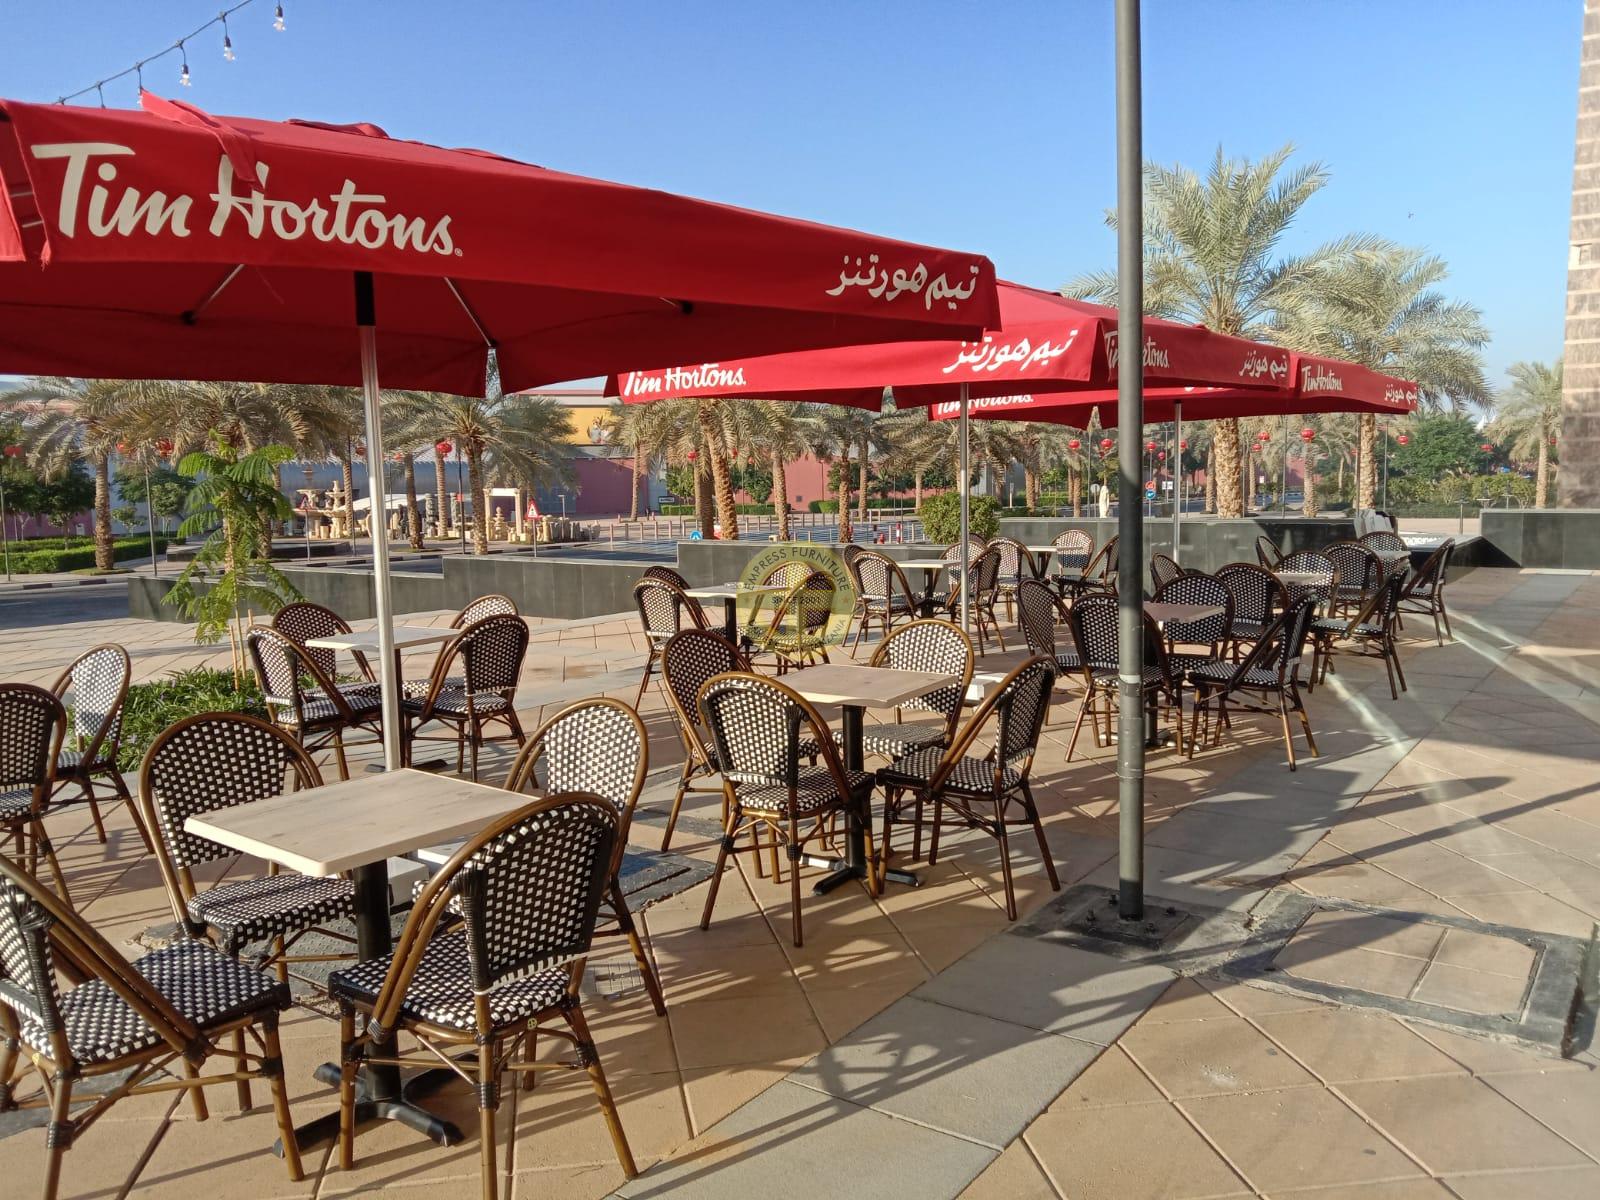 outdoor cafe furniture